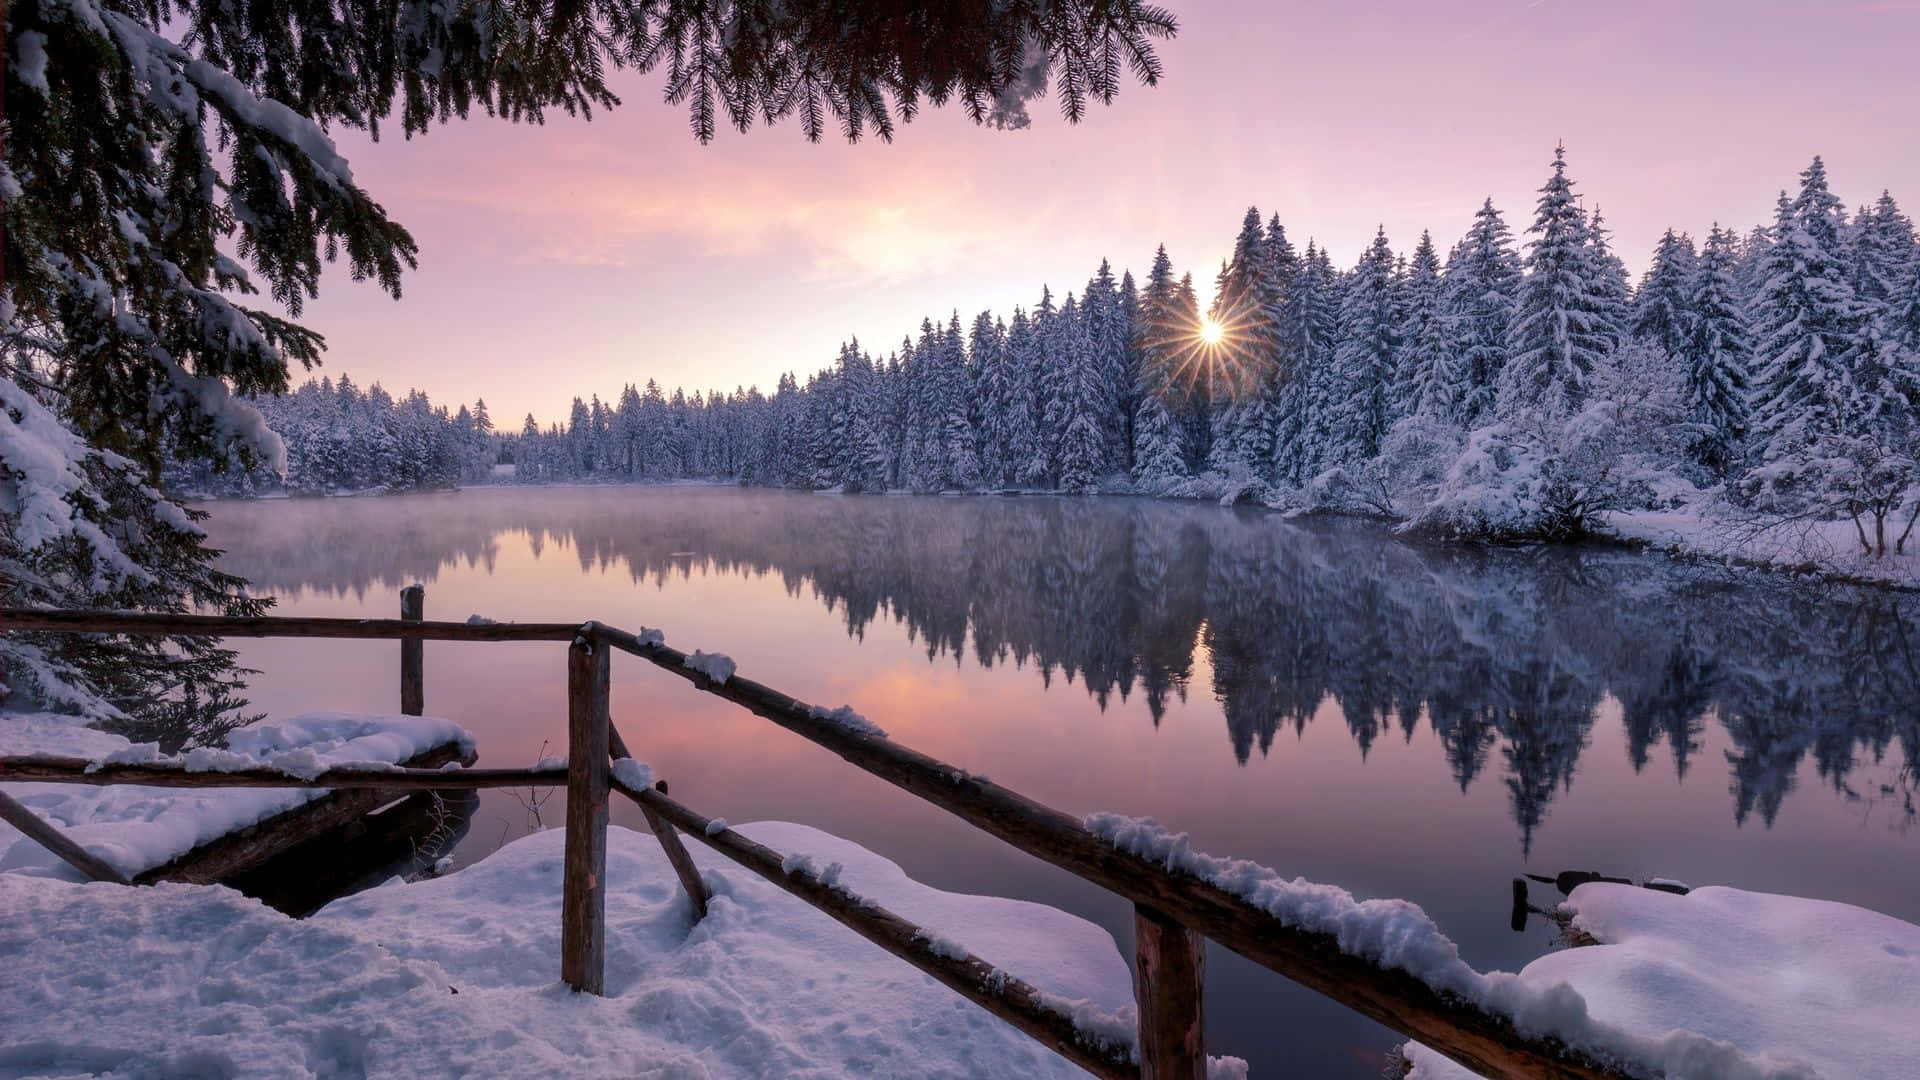 Stay Warm and Productive with a Laptop This Winter Wallpaper